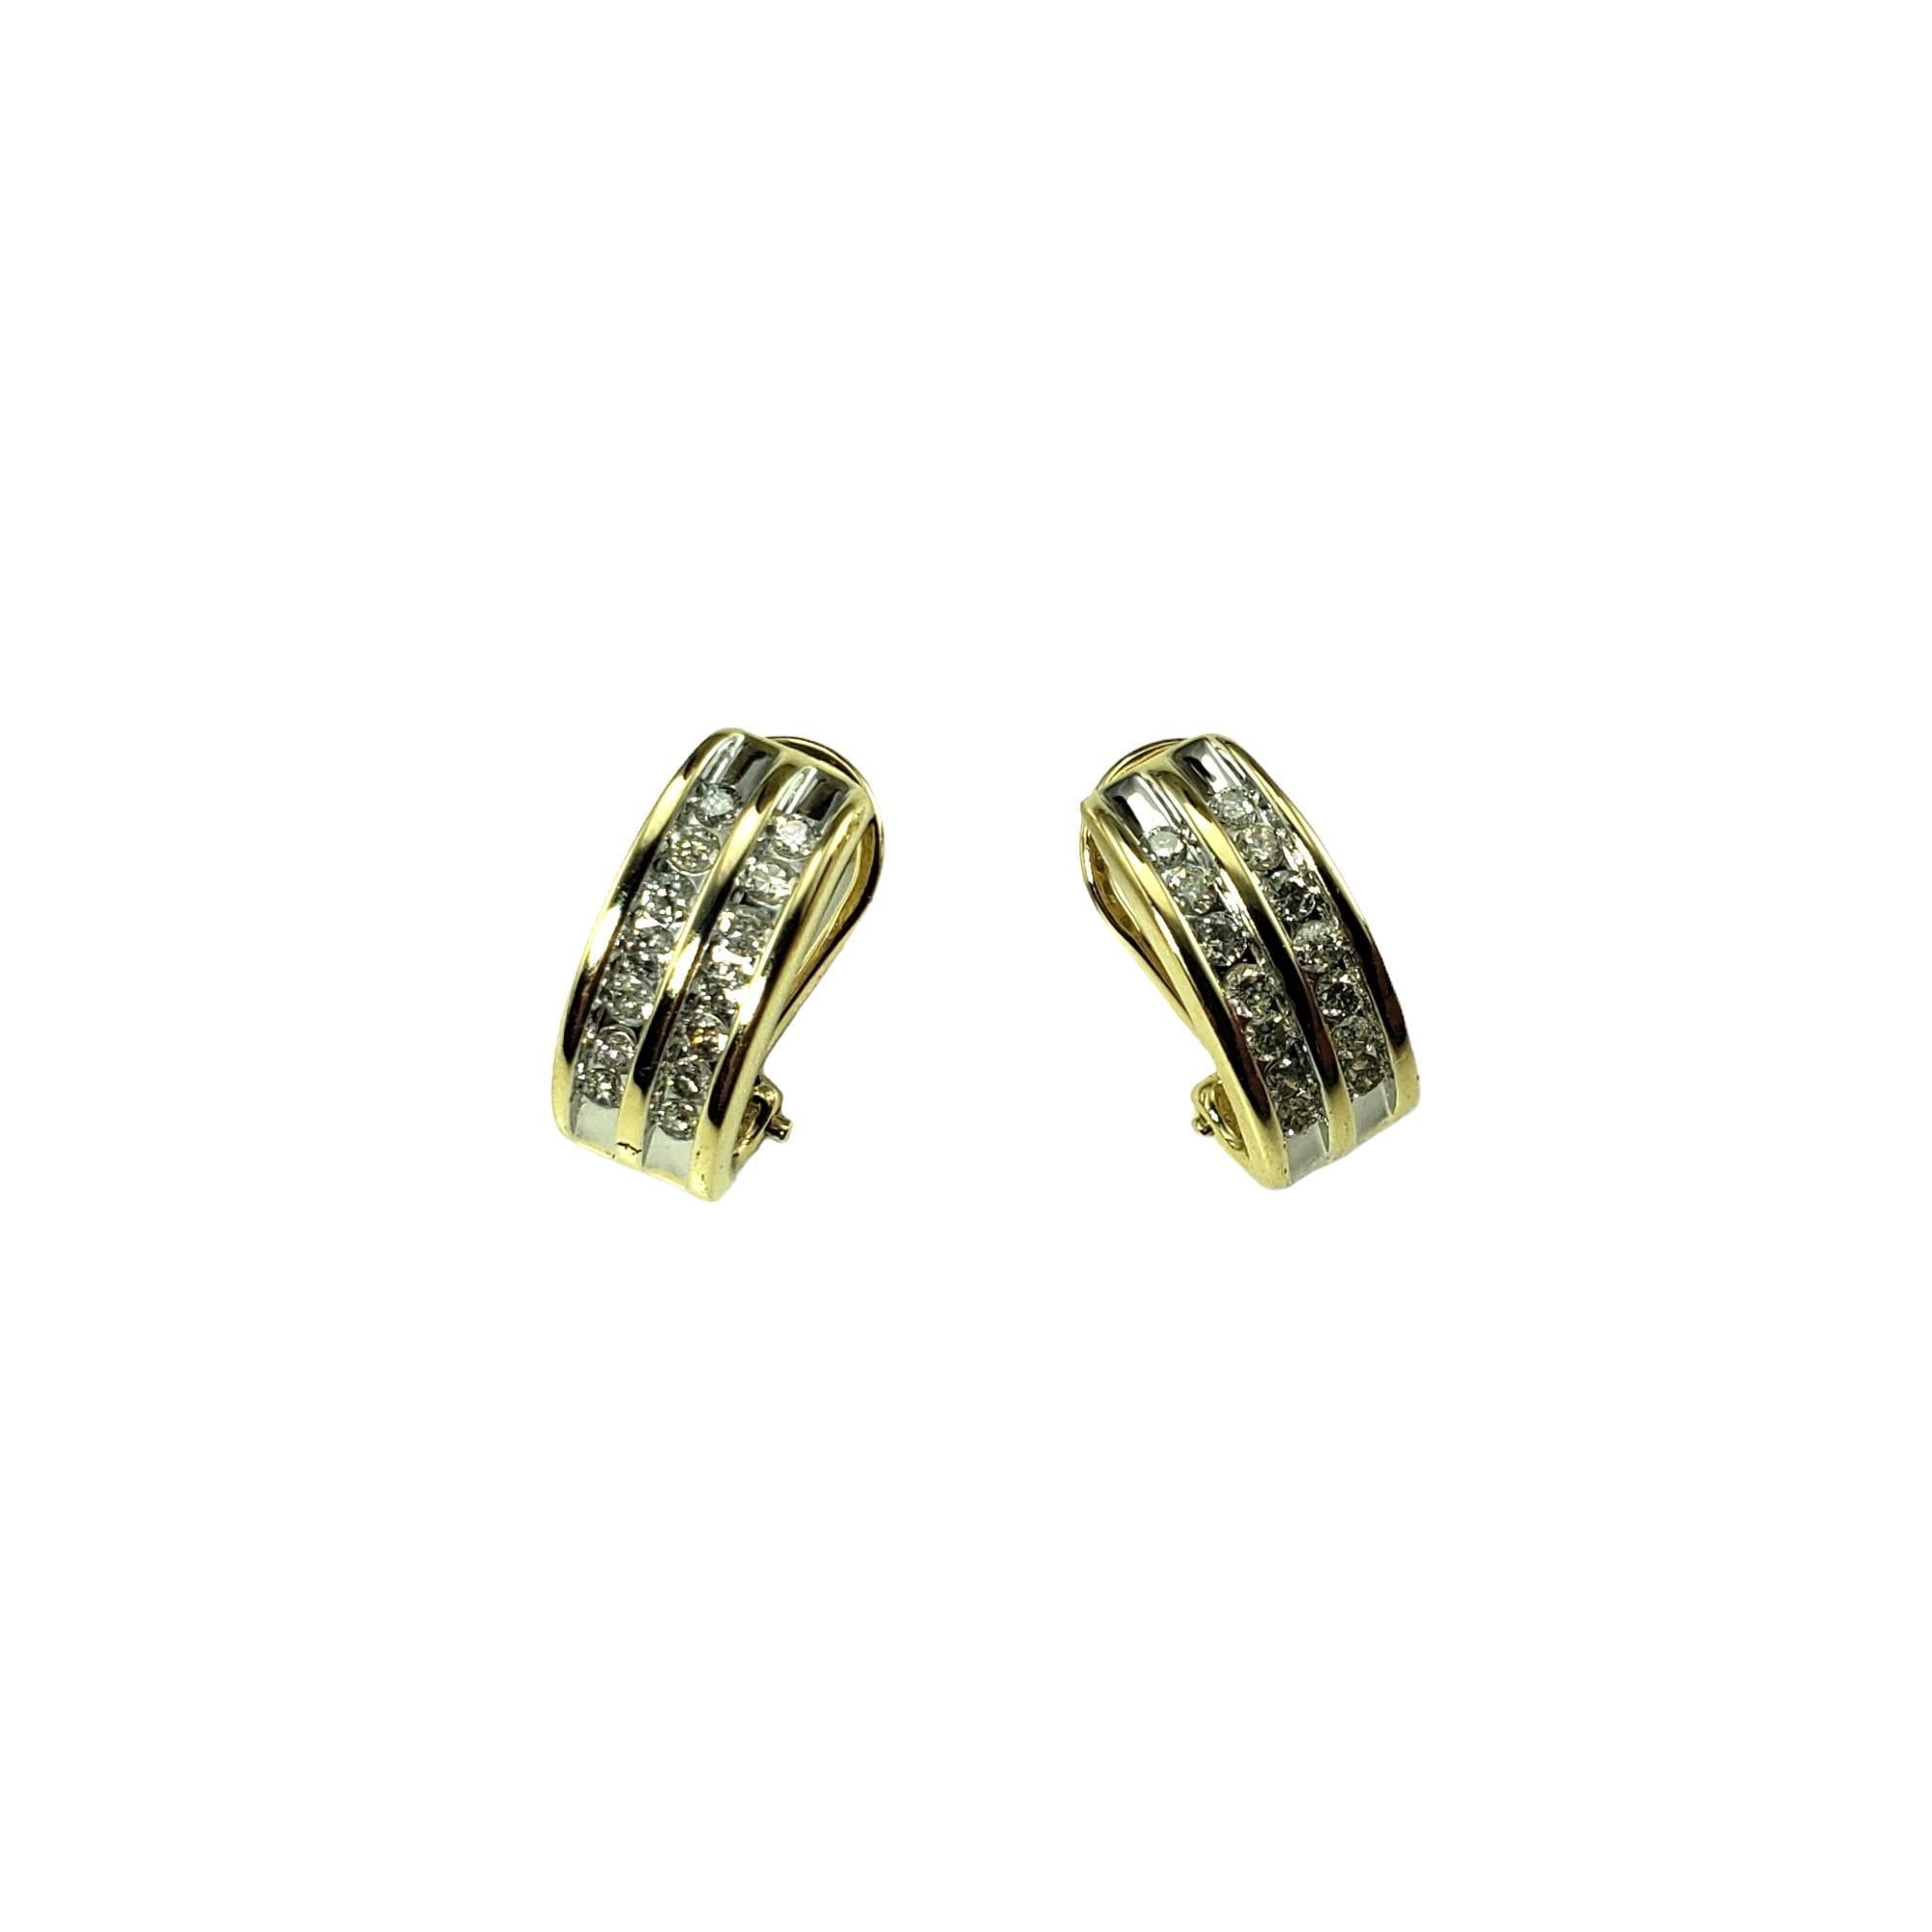 Vintage 14K Yellow Gold and Diamond Earrings-

These sparkling earrings each features seven round brilliant cut diamonds set in classic 14K yellow gold.  Omega back closures.

Approximate total diamond weight:  .25 ct.

Diamond clarity: